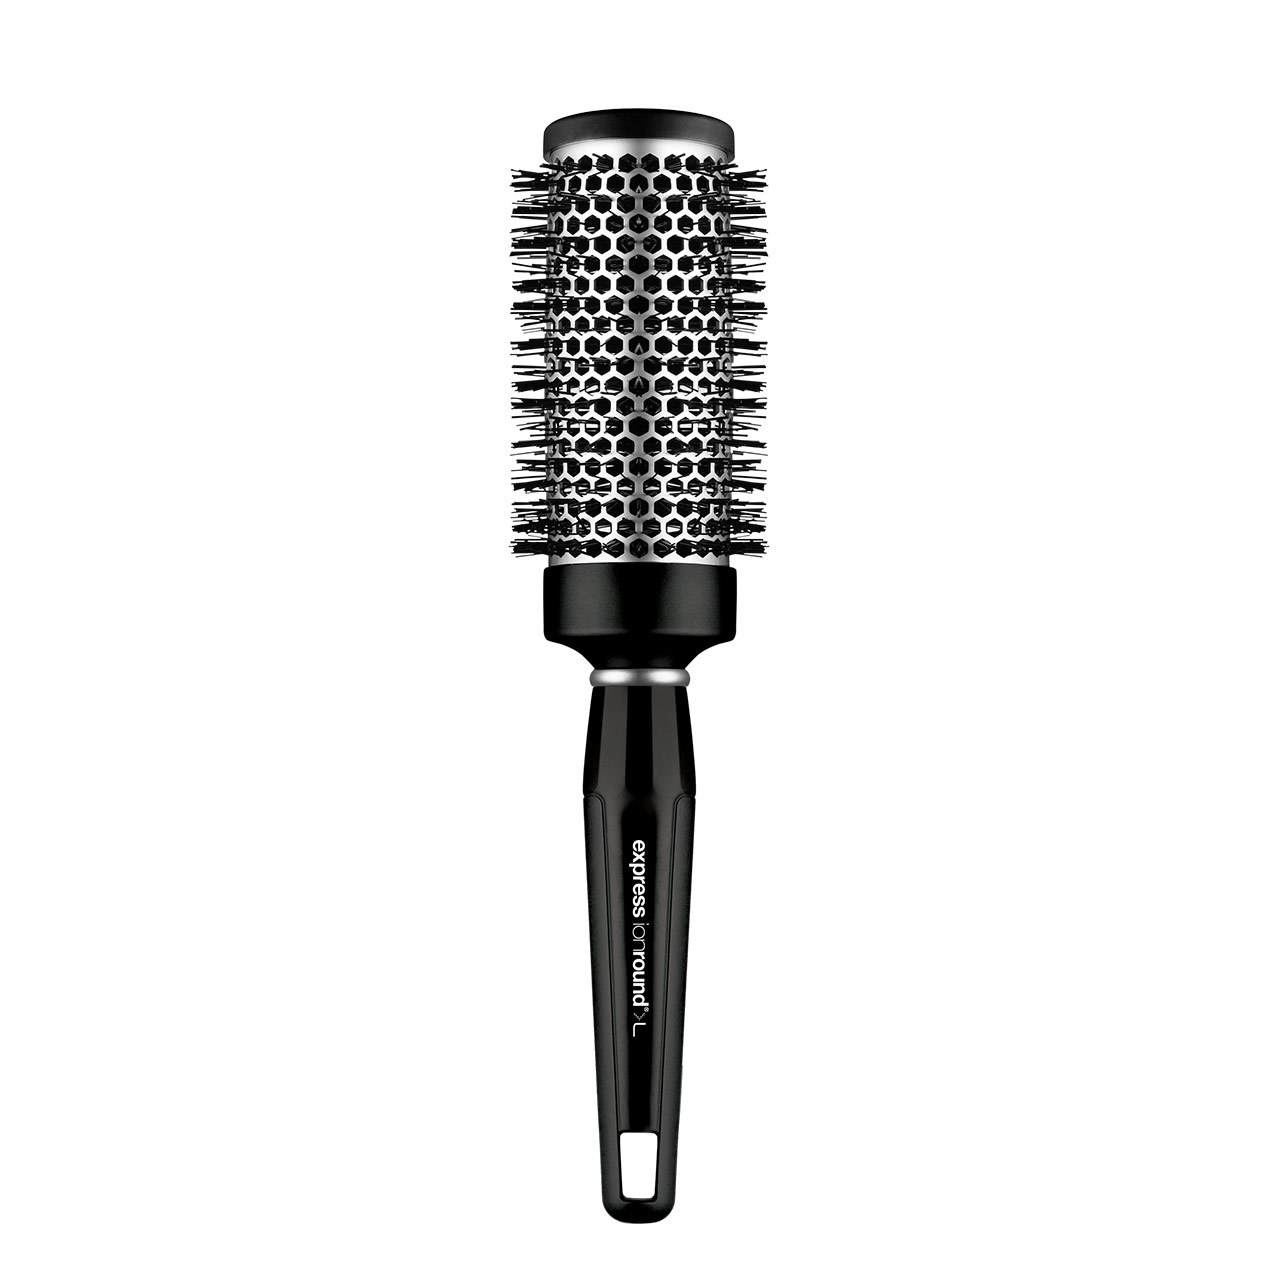 What Causes Hair Damage: Paul Mitchell Express Ion Round Brush